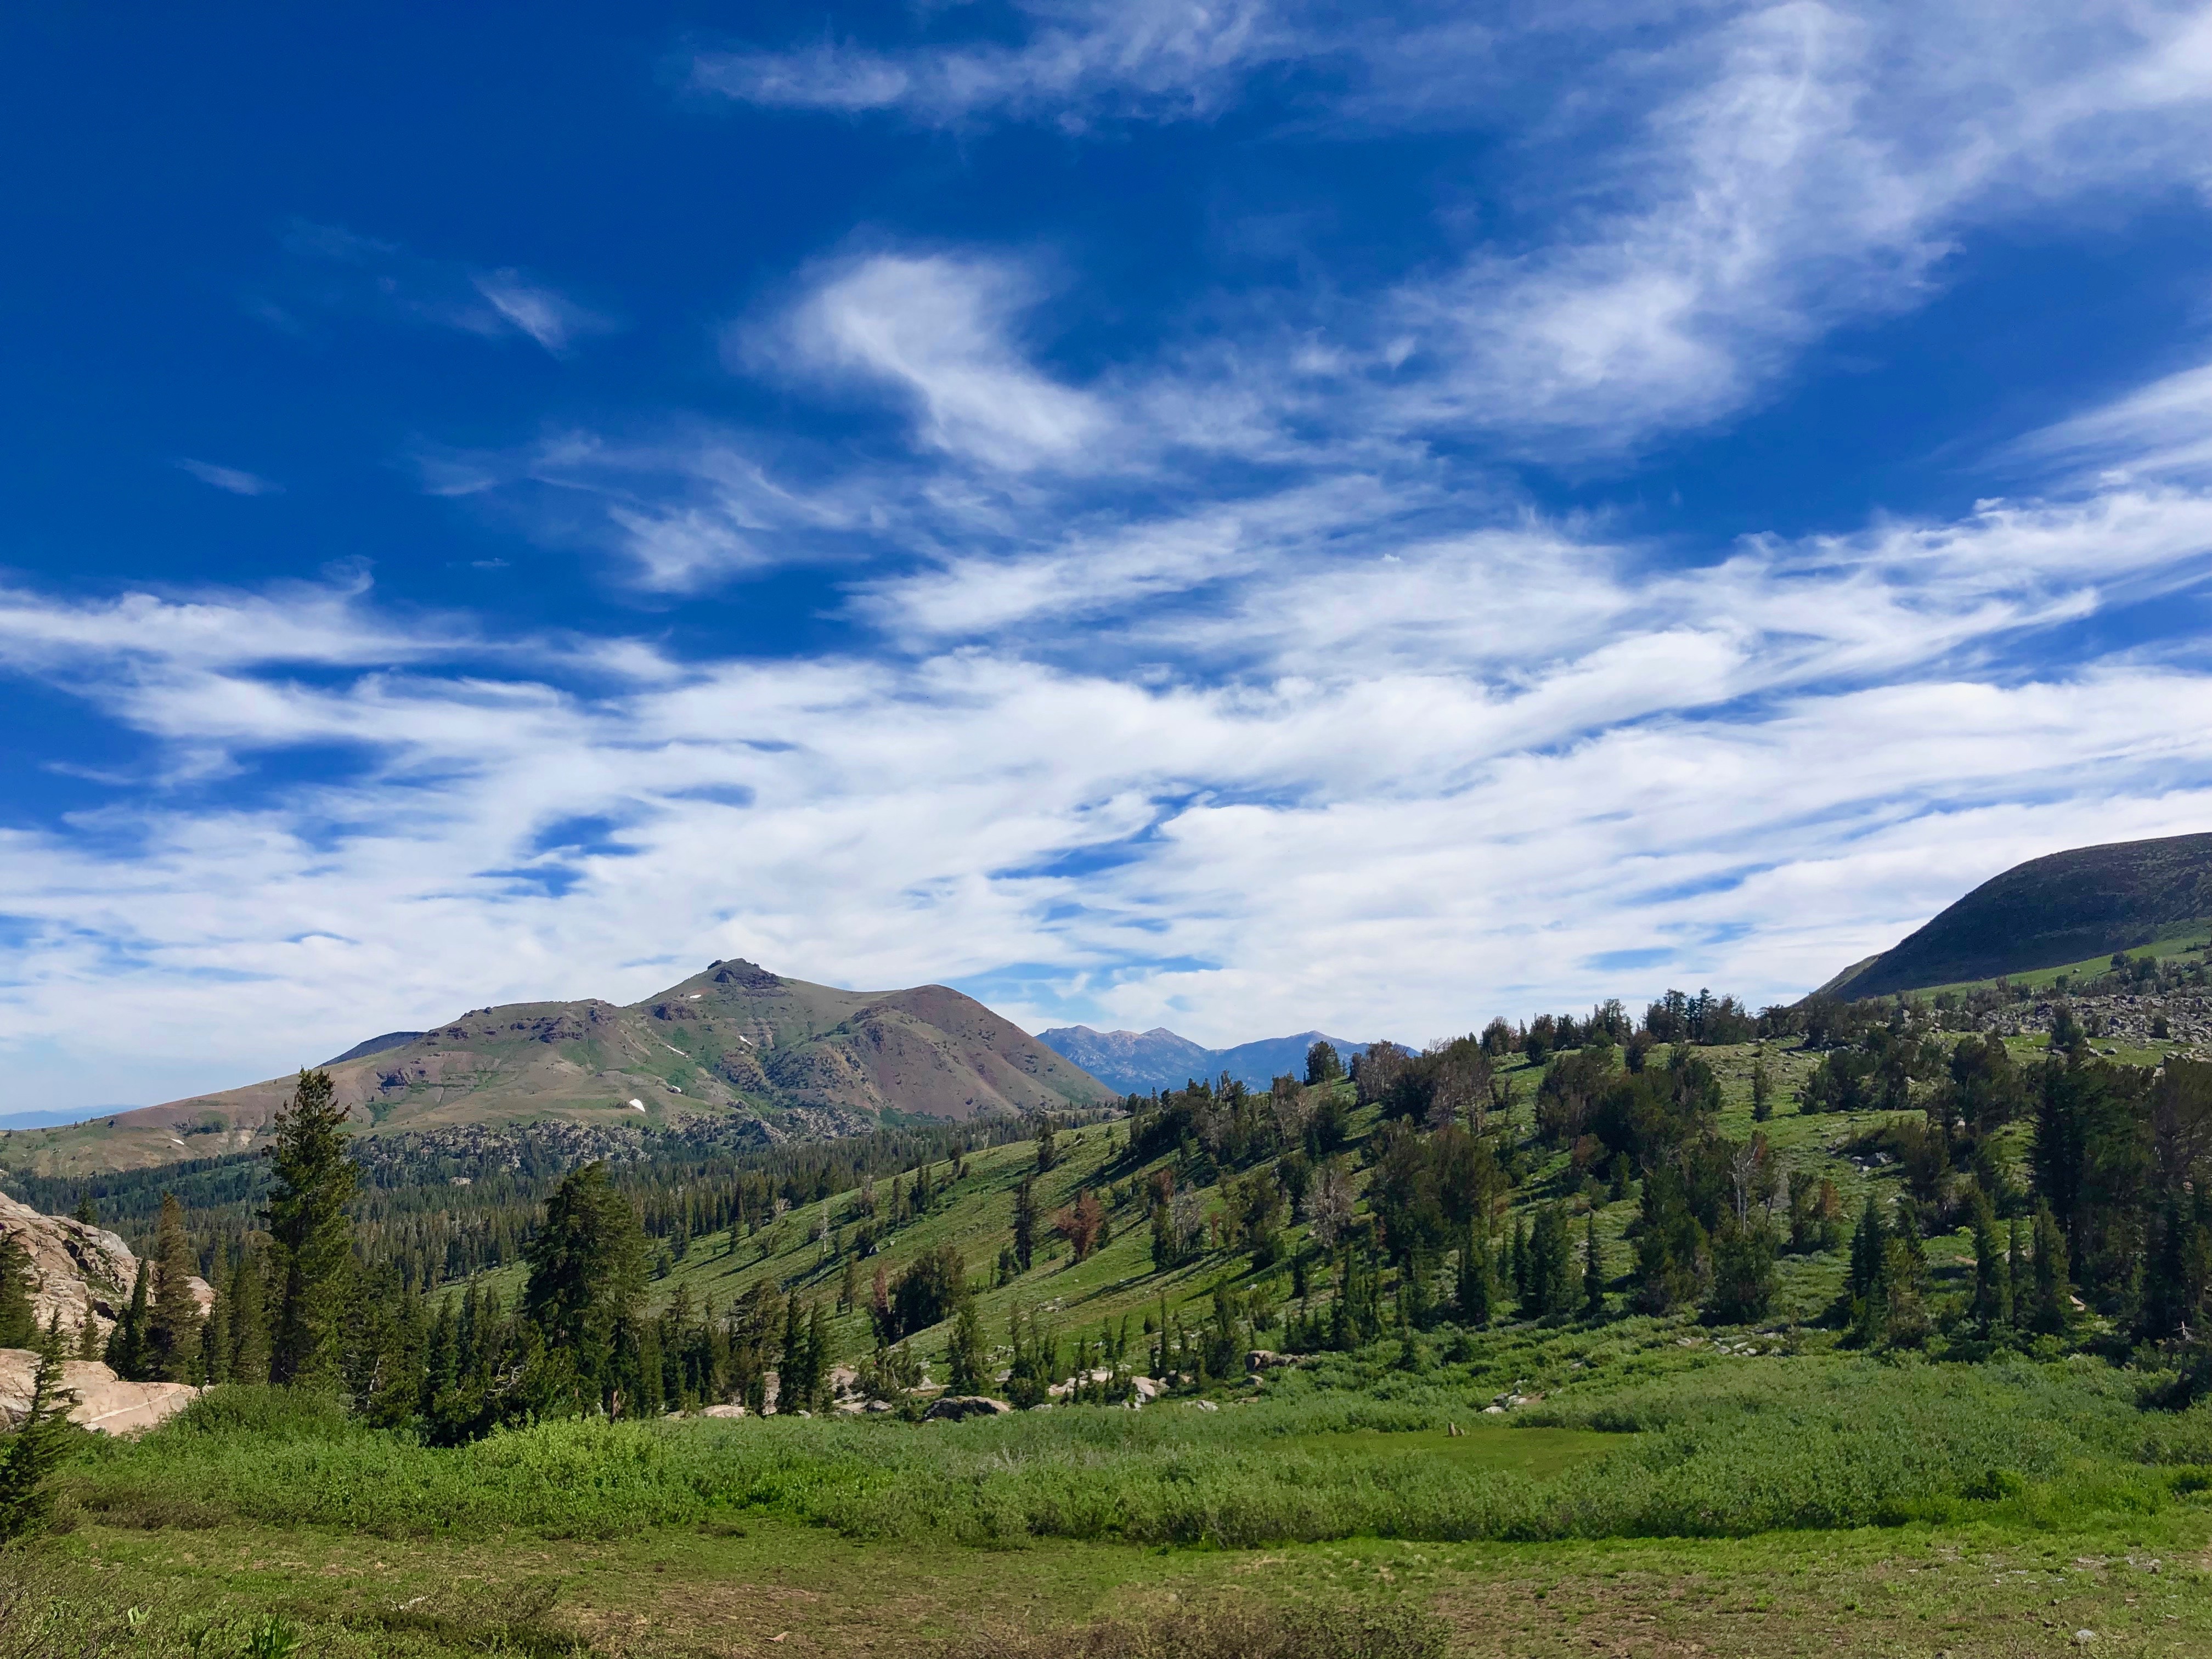 Mountains rise above a forest and meadow in the Eldorado National Forest